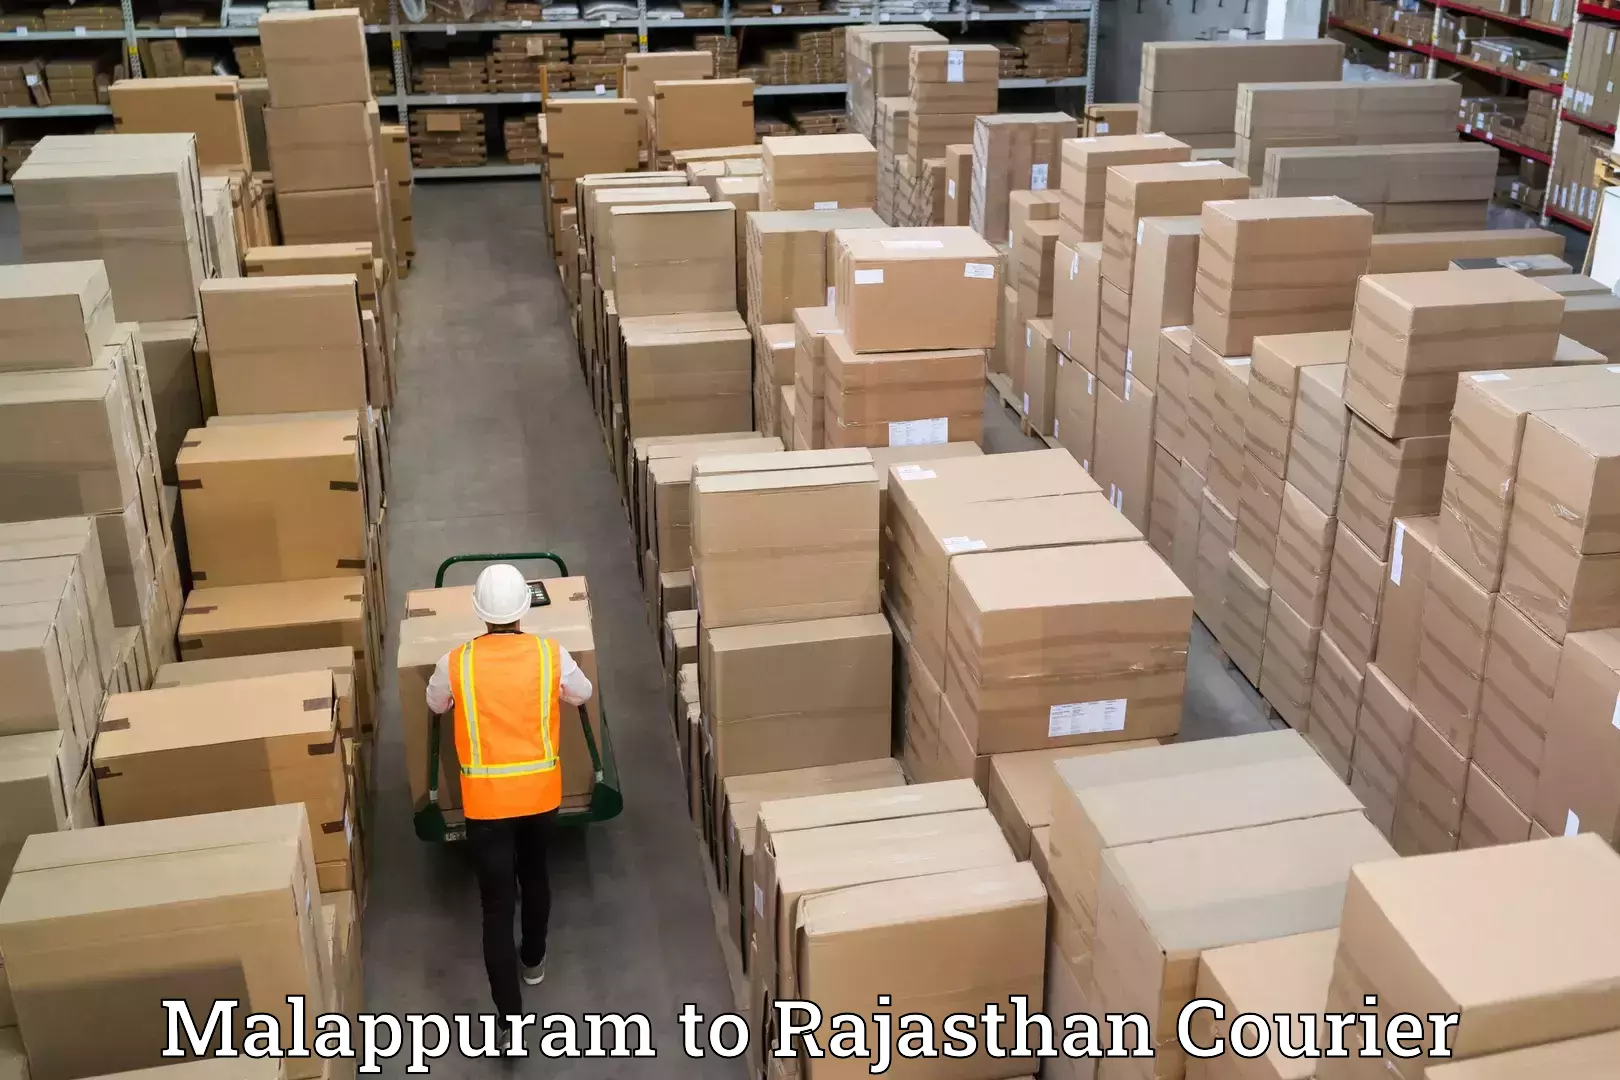 Furniture moving specialists Malappuram to Rajasthan